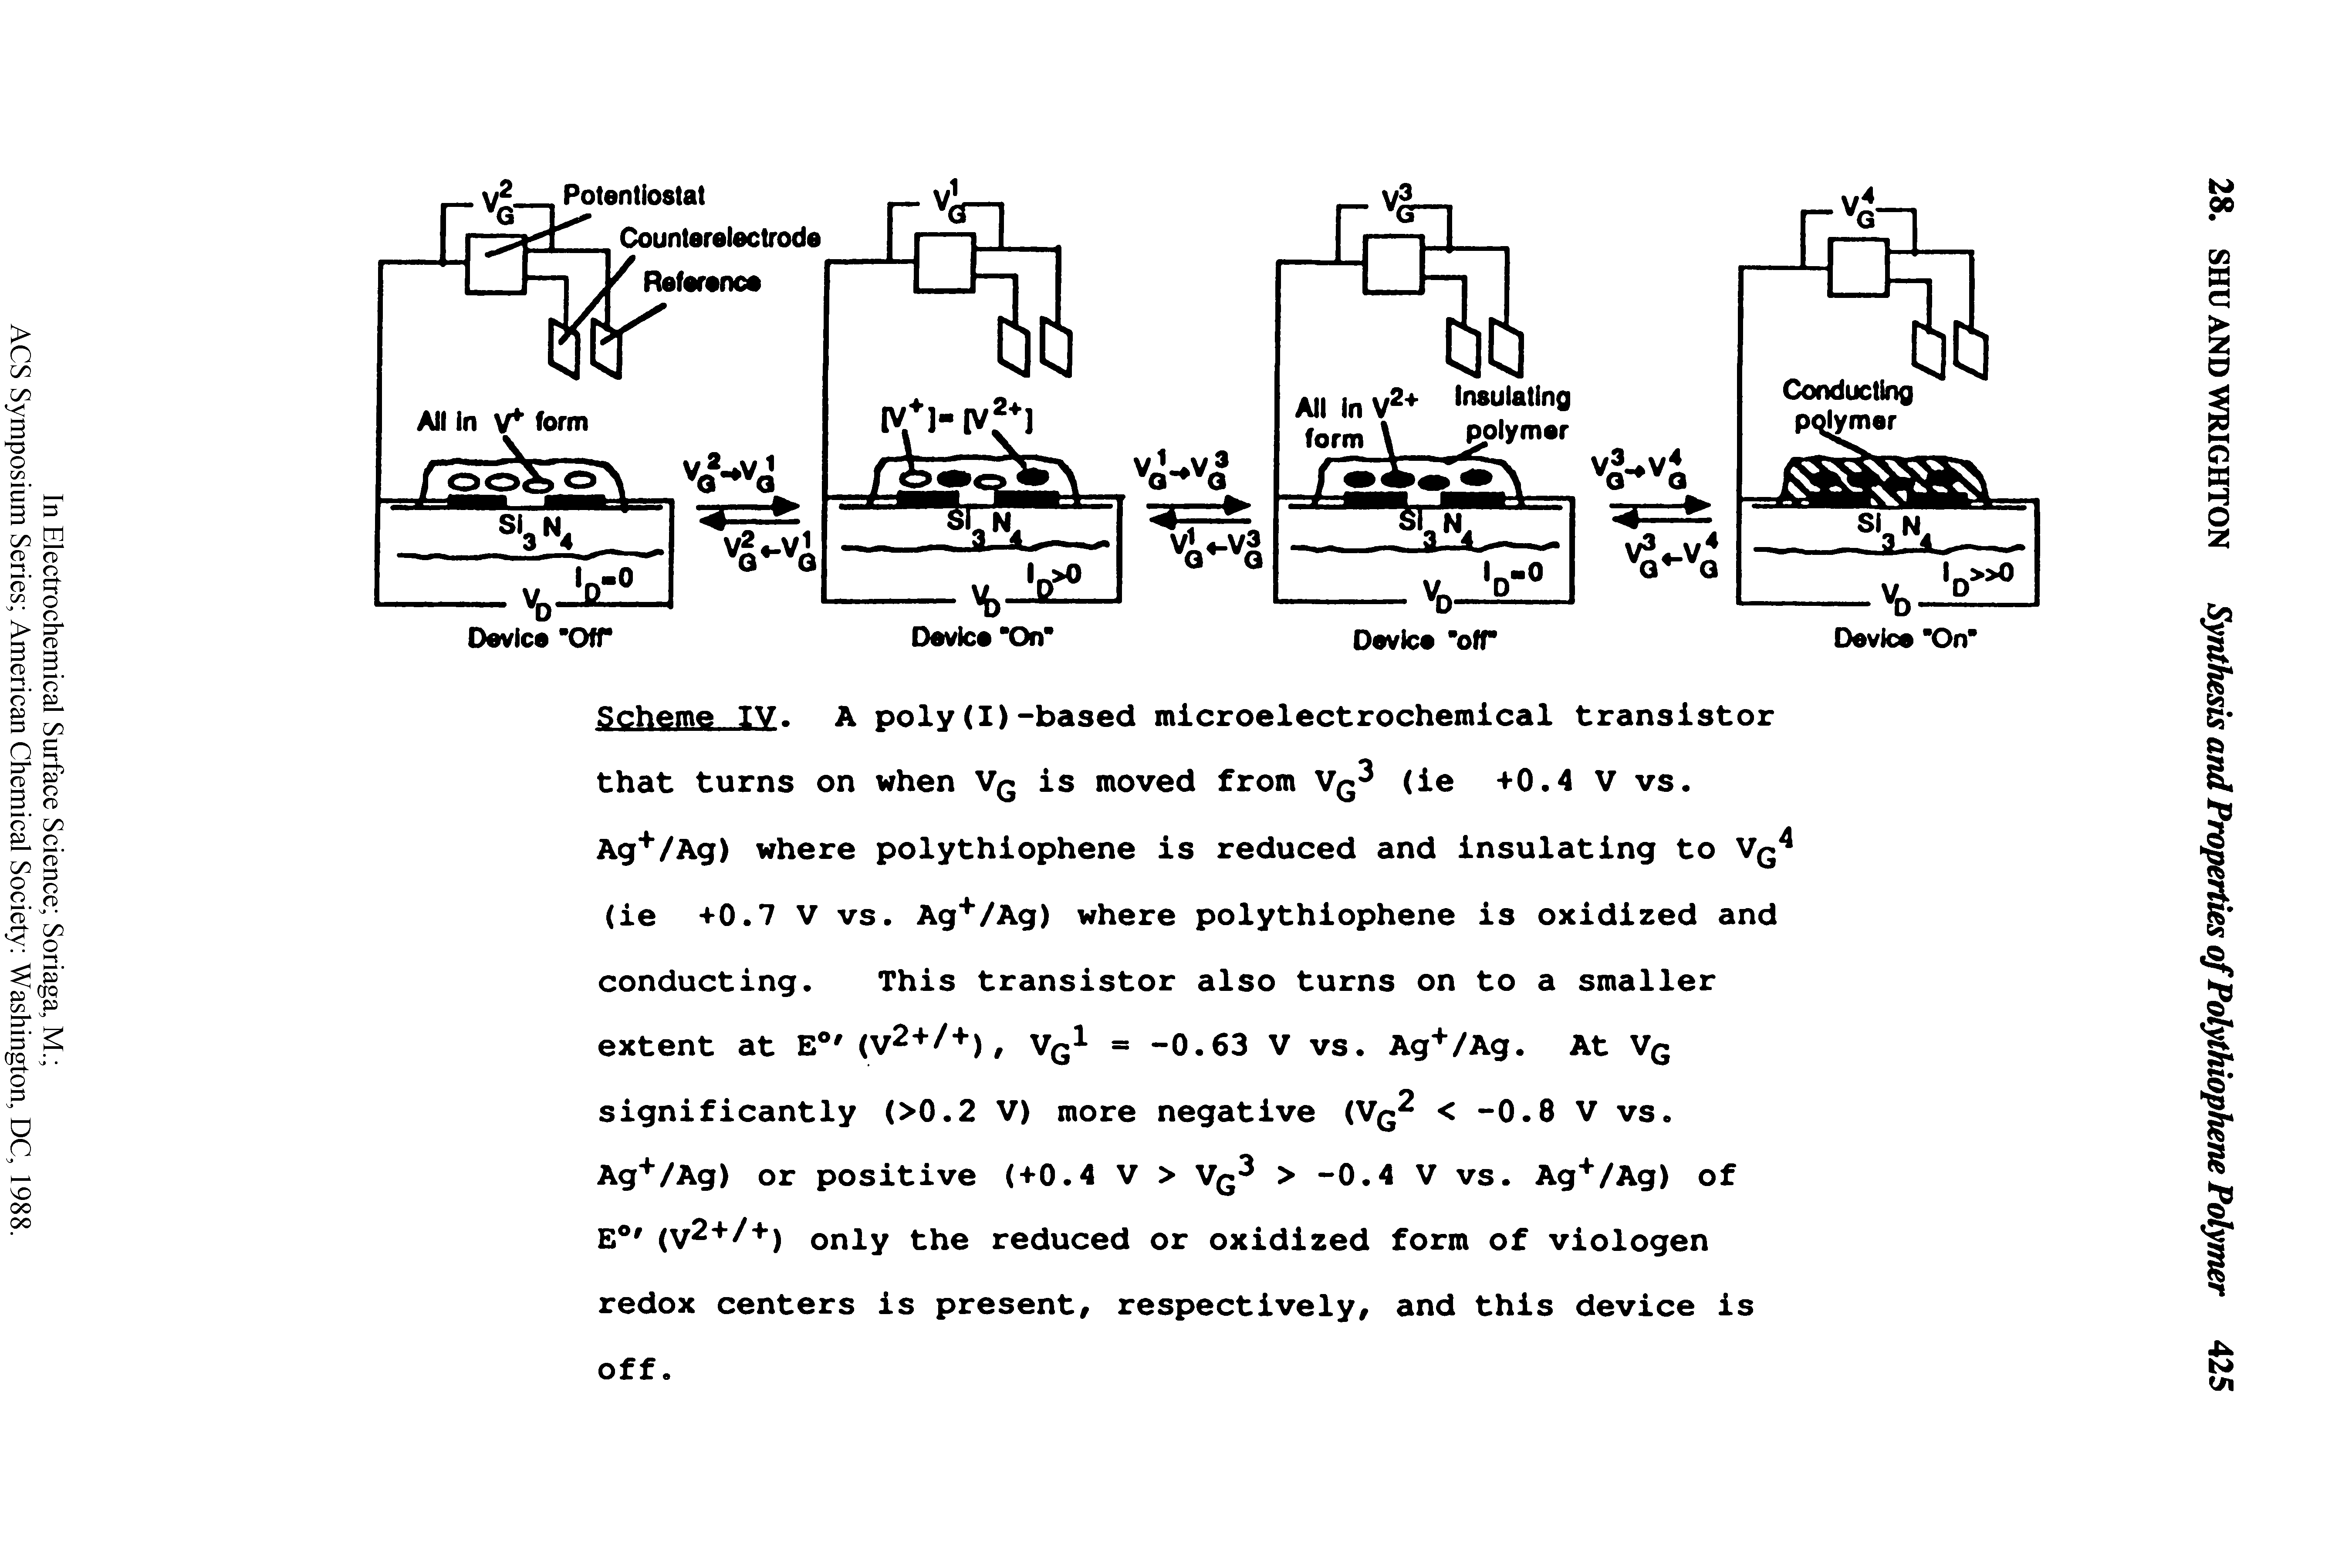 Scheme IV, A poly(I)-based microelectrochemical transistor that turns on when VG is moved from VG (ie +0.4 V vs. Ag+/Ag) where polythiophene is reduced and insulating to Vq4 (ie +0.7 V vs. Ag+/Ag) where polythiophene is oxidized and conducting. This transistor also turns on to a smaller extent at E0/ (V2+/+), Vq1 = -0.63 V vs. Ag+/Ag. At VG significantly (>0.2 V) more negative (Vq2 < -0.8 V vs. Ag+/Ag) or positive (+0.4 V > Vq > -0.4 V vs. Ag+/Ag) of E° (V2+/+) only the reduced or oxidized form of viologen redox centers is present, respectively, and this device is...